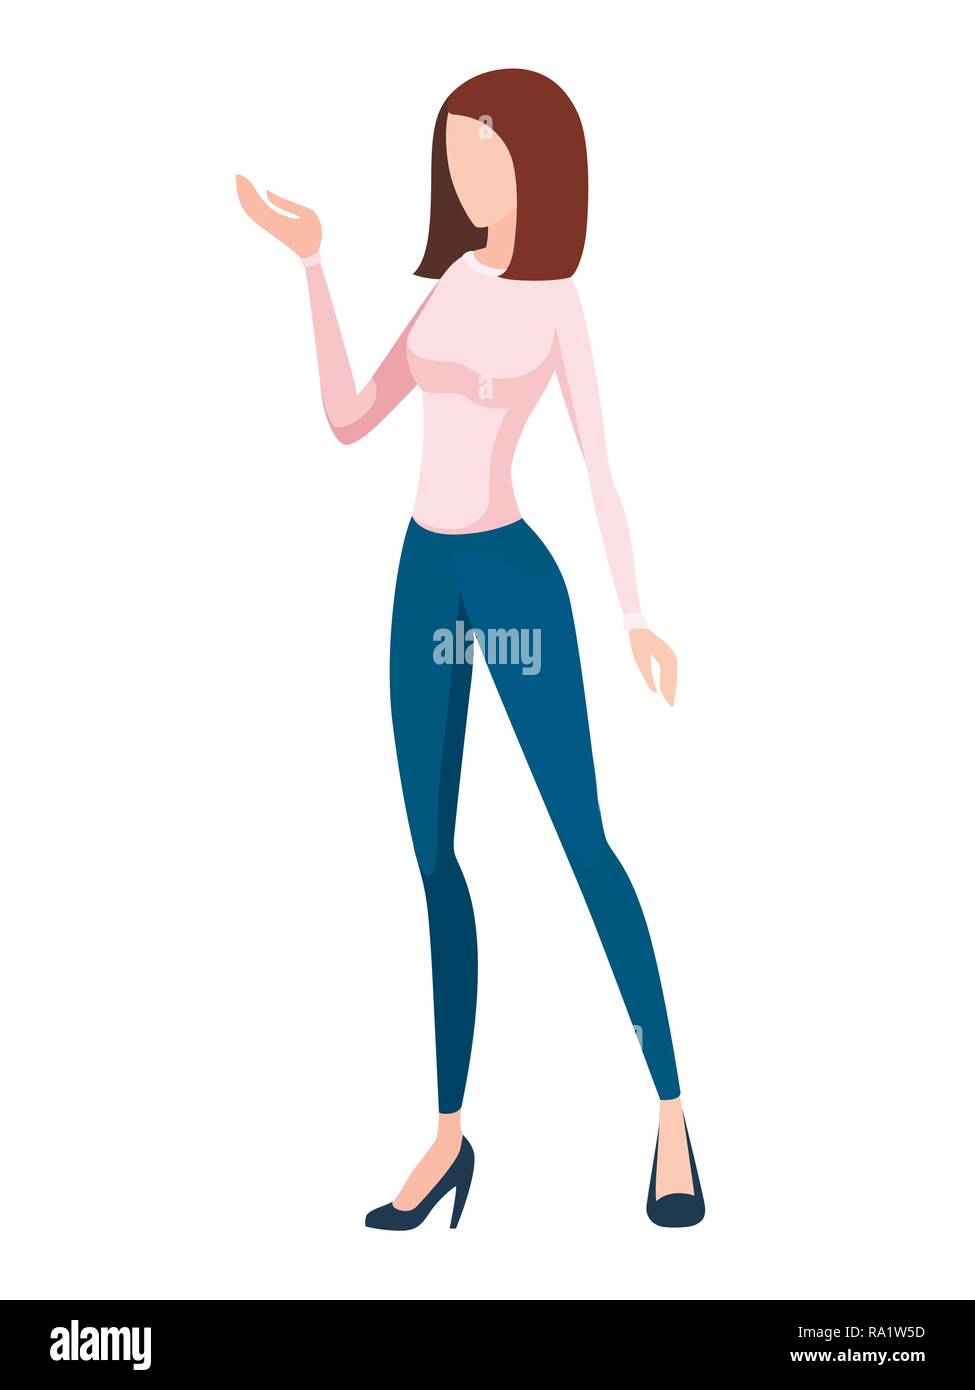 Women In Blue Jeans And Pink T Shirt Standing No Face Design Cartoon Flat Illustration Isolated On White Background Stock Vector Image Art Alamy